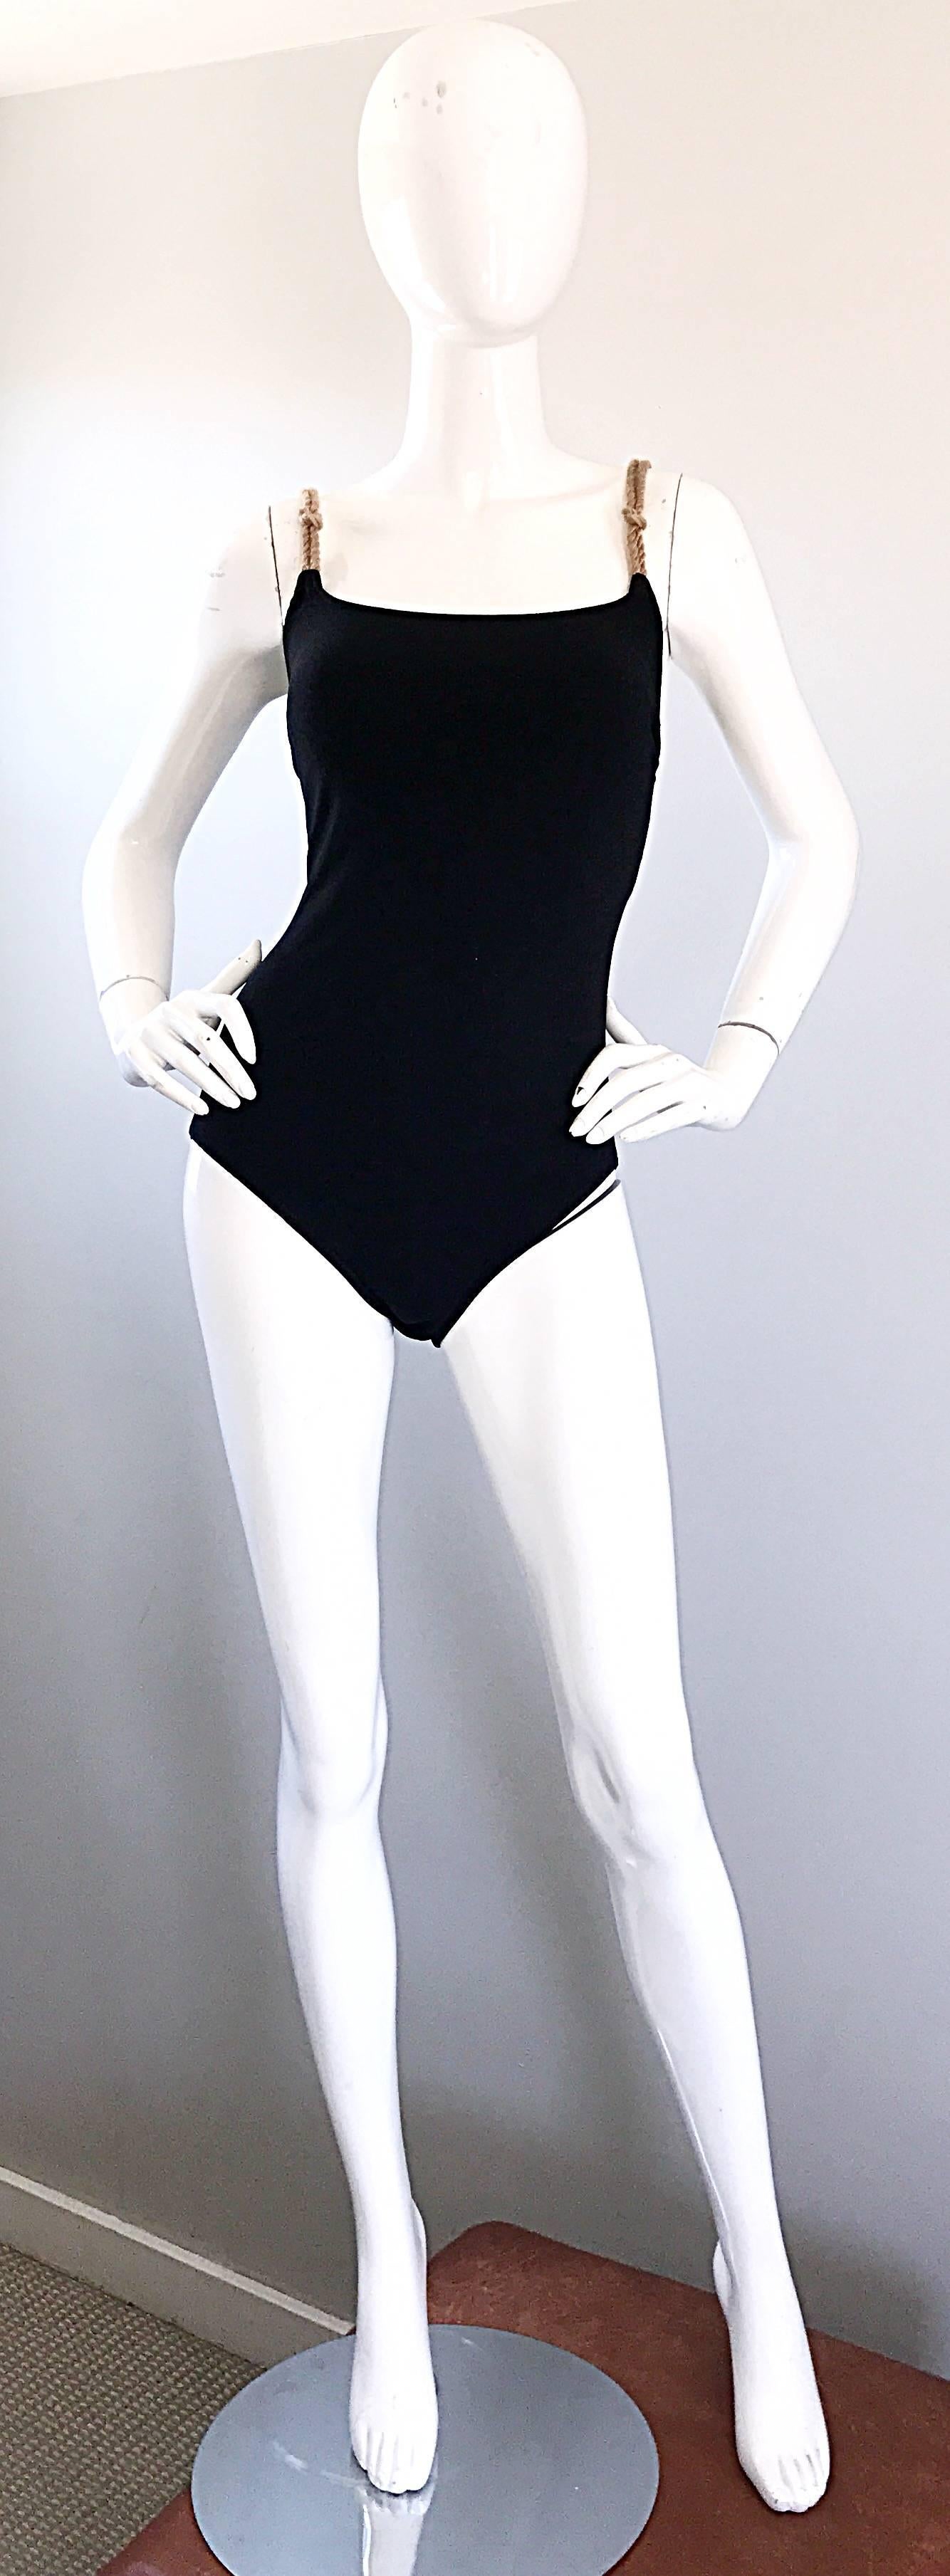 Chic vintage BILL BLASS black one piece swimsuit or bodysuit! Features chic tan rope straps that add just the right amount of jazz to this figure flaunting piece! Great alone for the pool or beach, or perfect with shorts, pants, jeans or a skirt. In